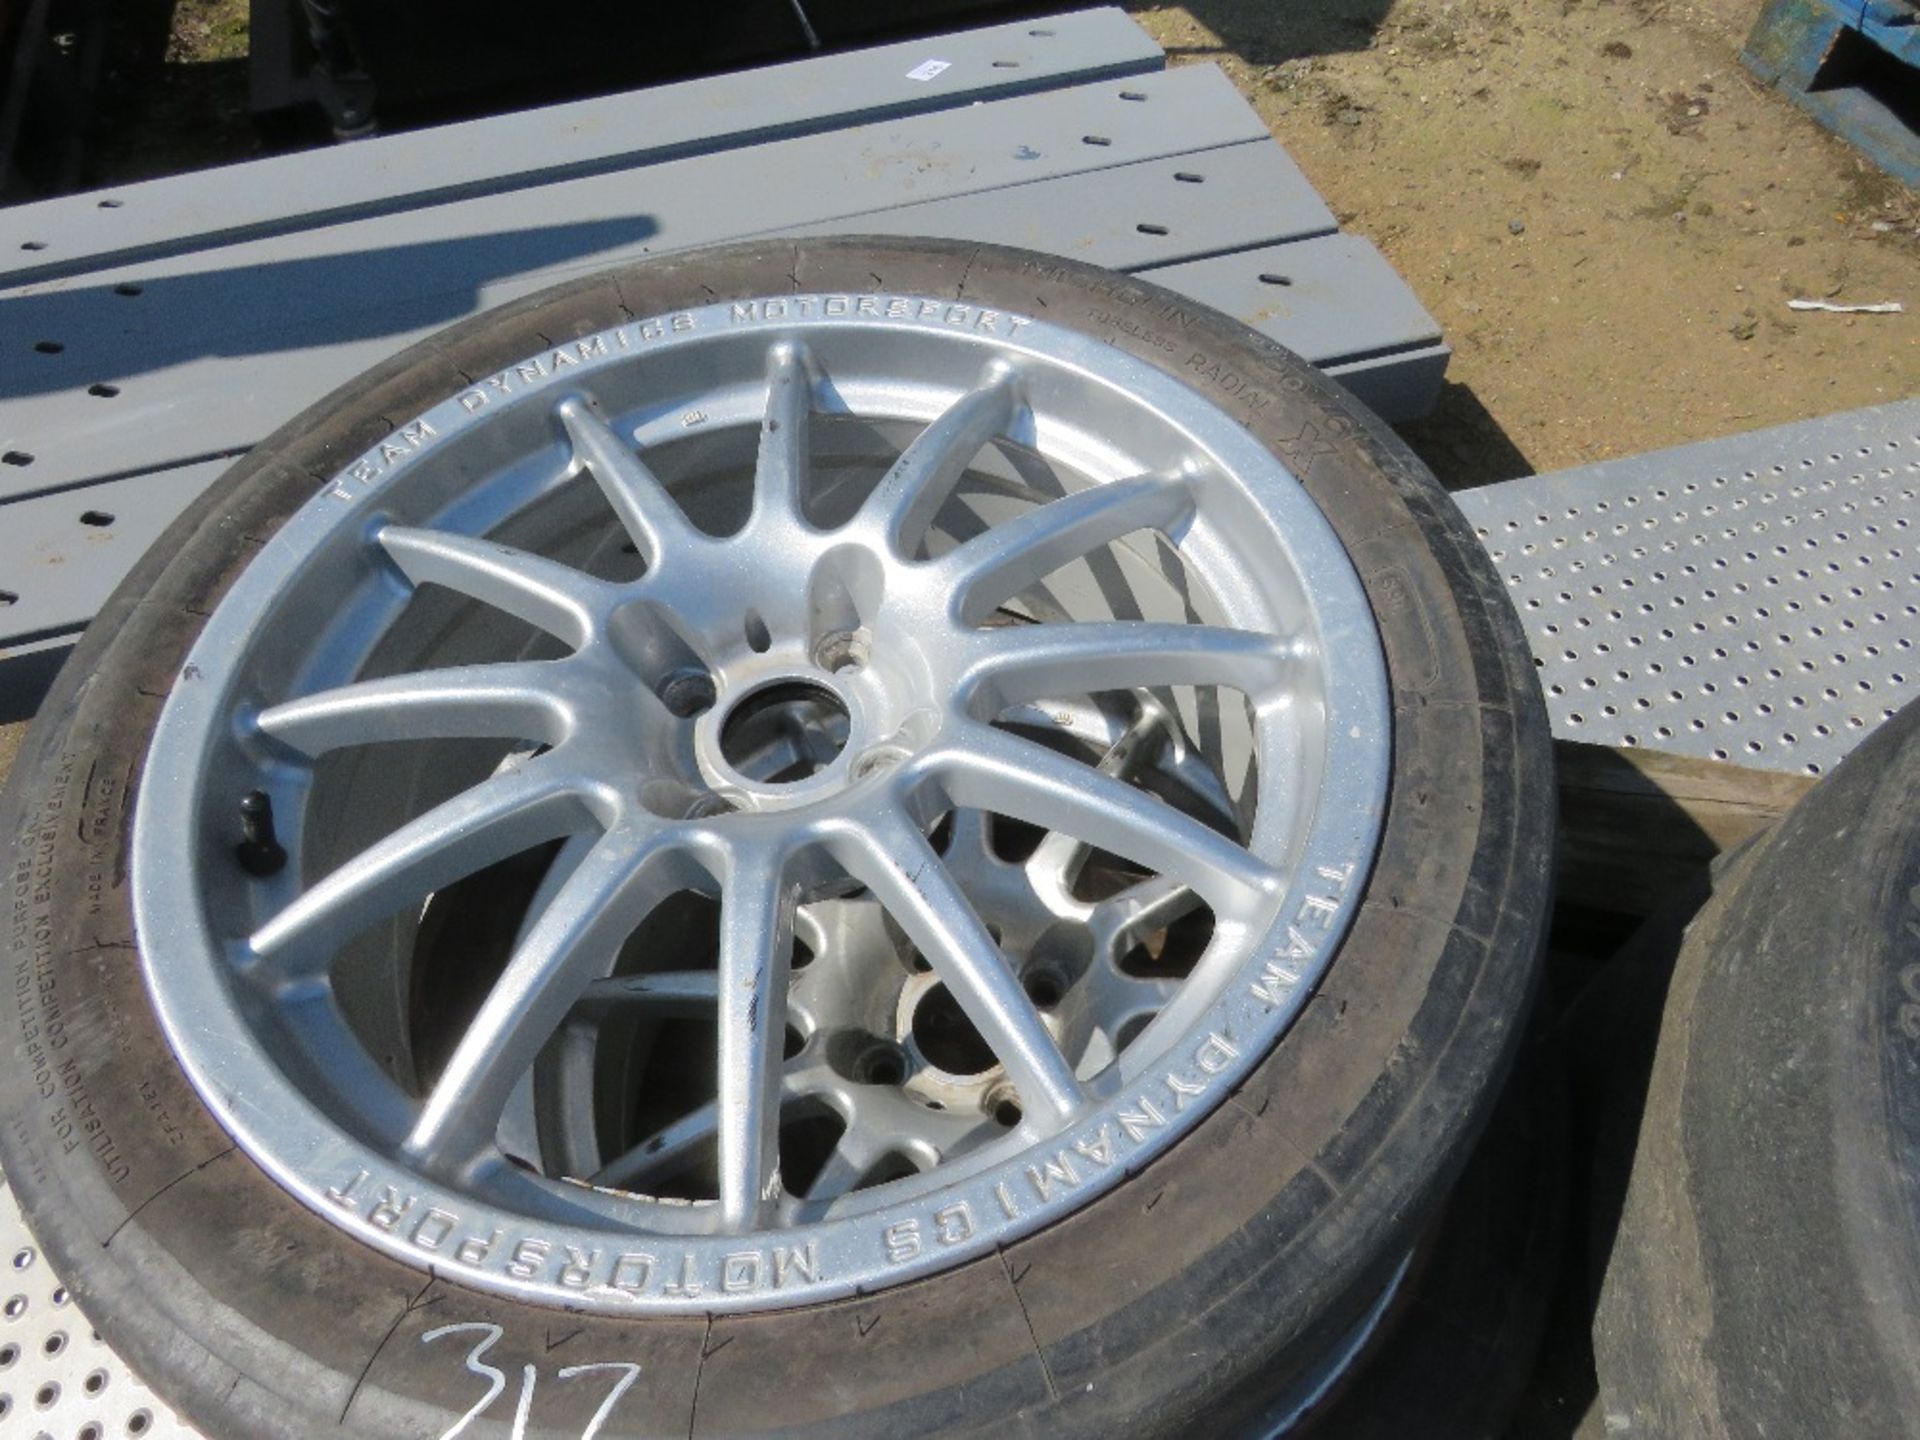 SET OF 4NO TEAM DYNAMICS MOTORSPORT RACING WHEELS AND TYRES, PREVIOUSLY USED ON AN ALFA ROMEO 33 RA - Image 3 of 4